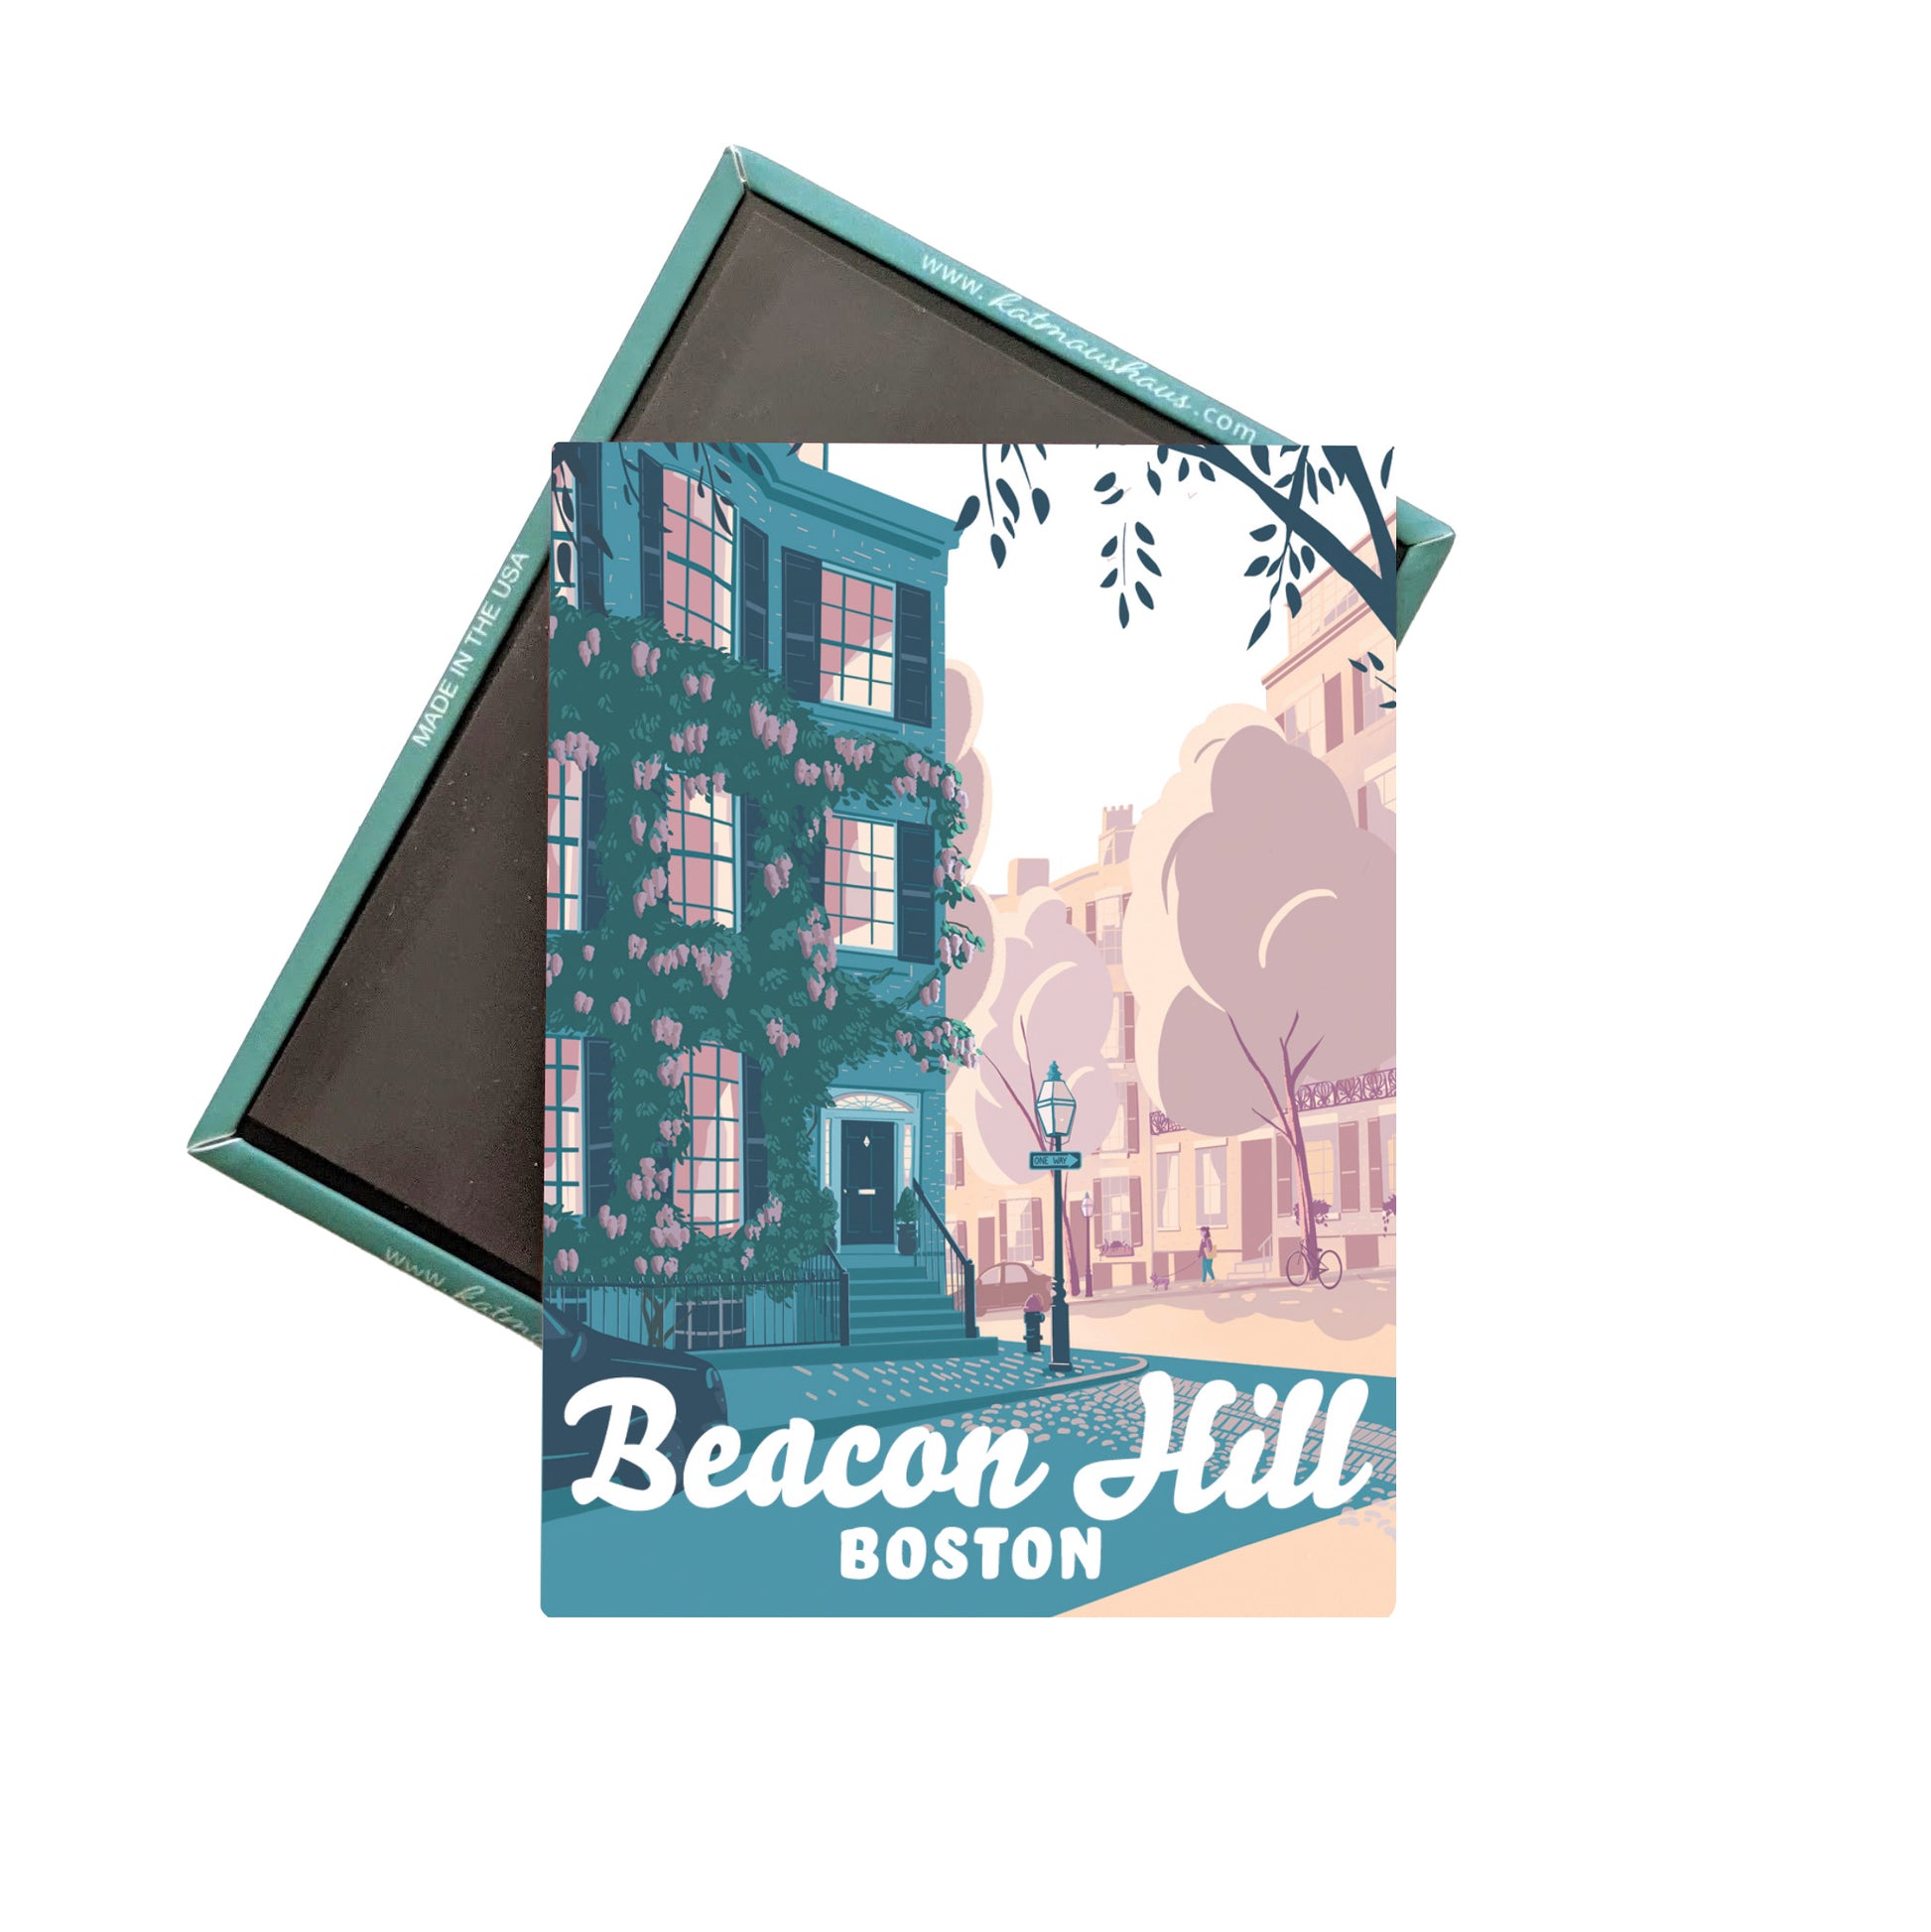 Beacon Hill - All You Need to Know BEFORE You Go (with Photos)